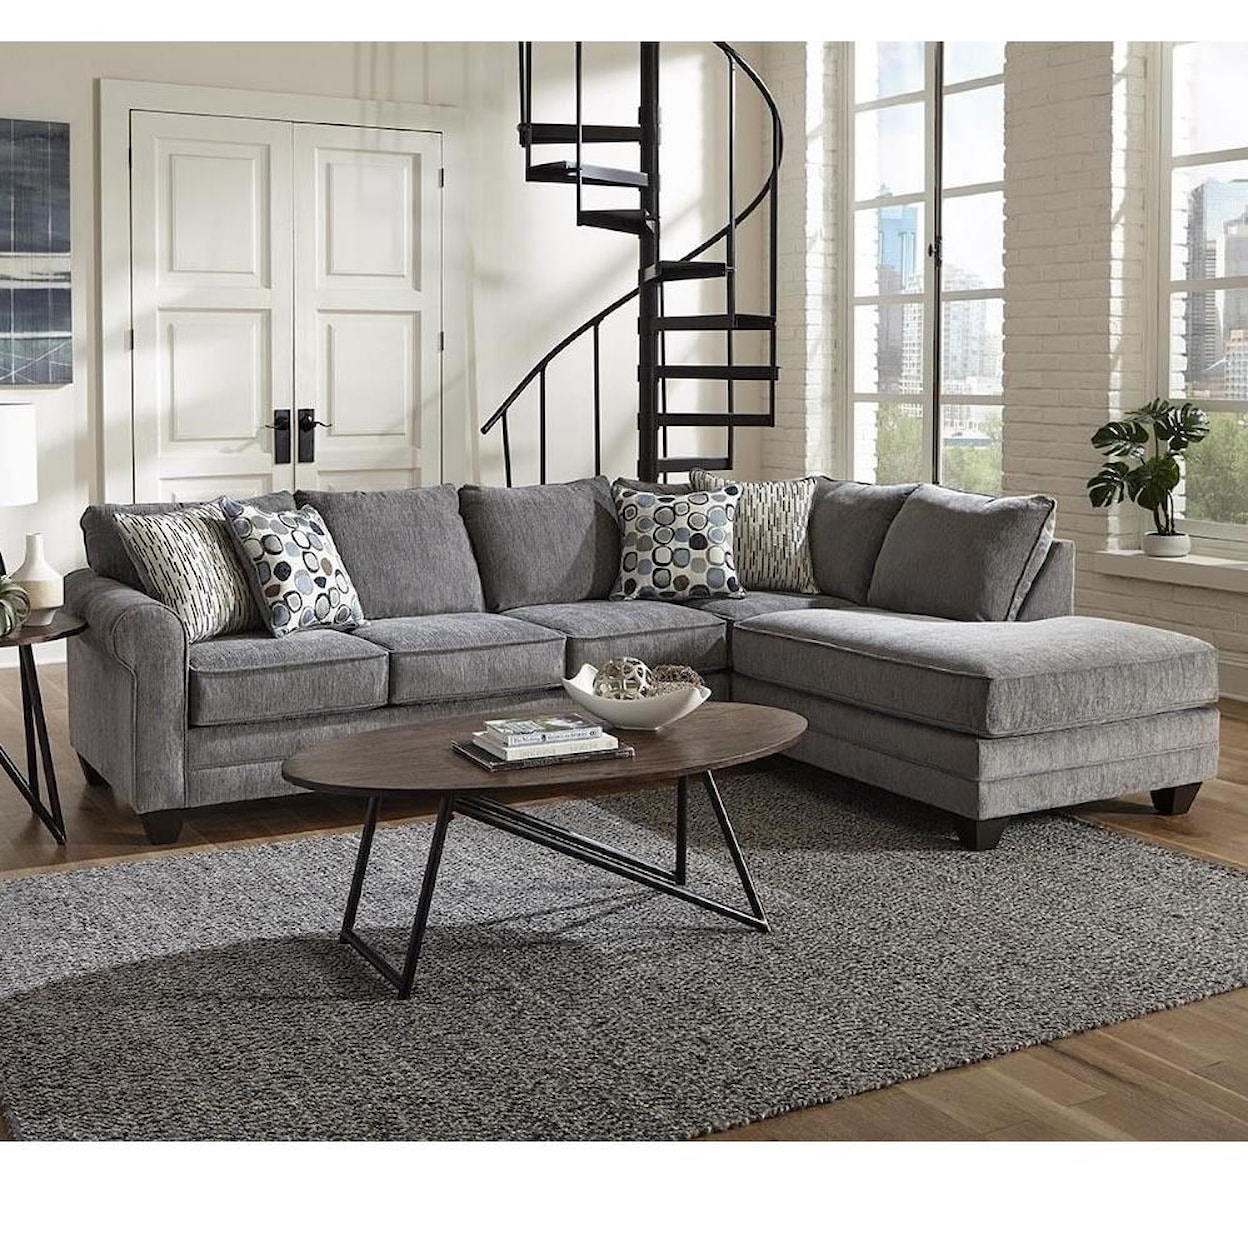 Albany 2214 2 PC Sectional Sofa